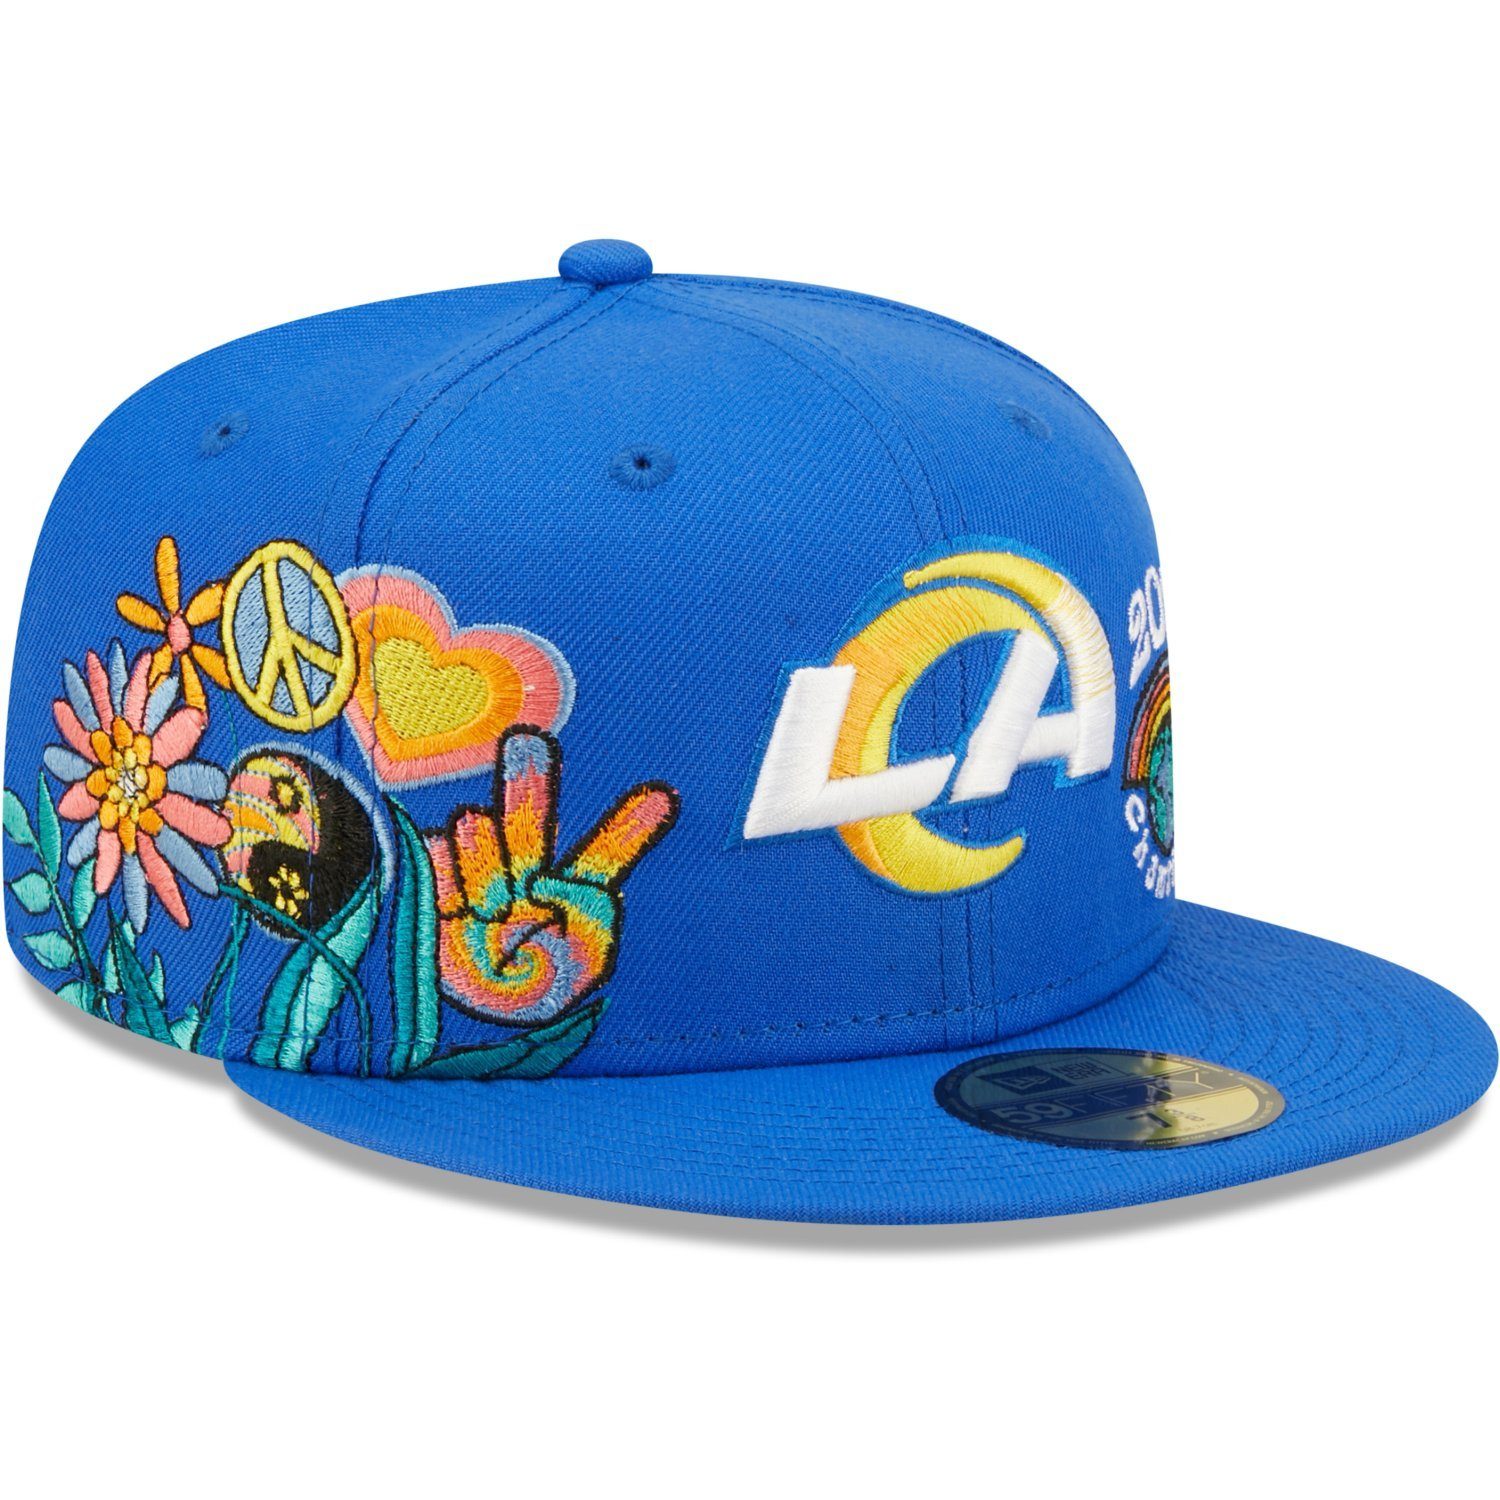 Angeles 59Fifty Era Los Cap Rams GROOVY New Fitted